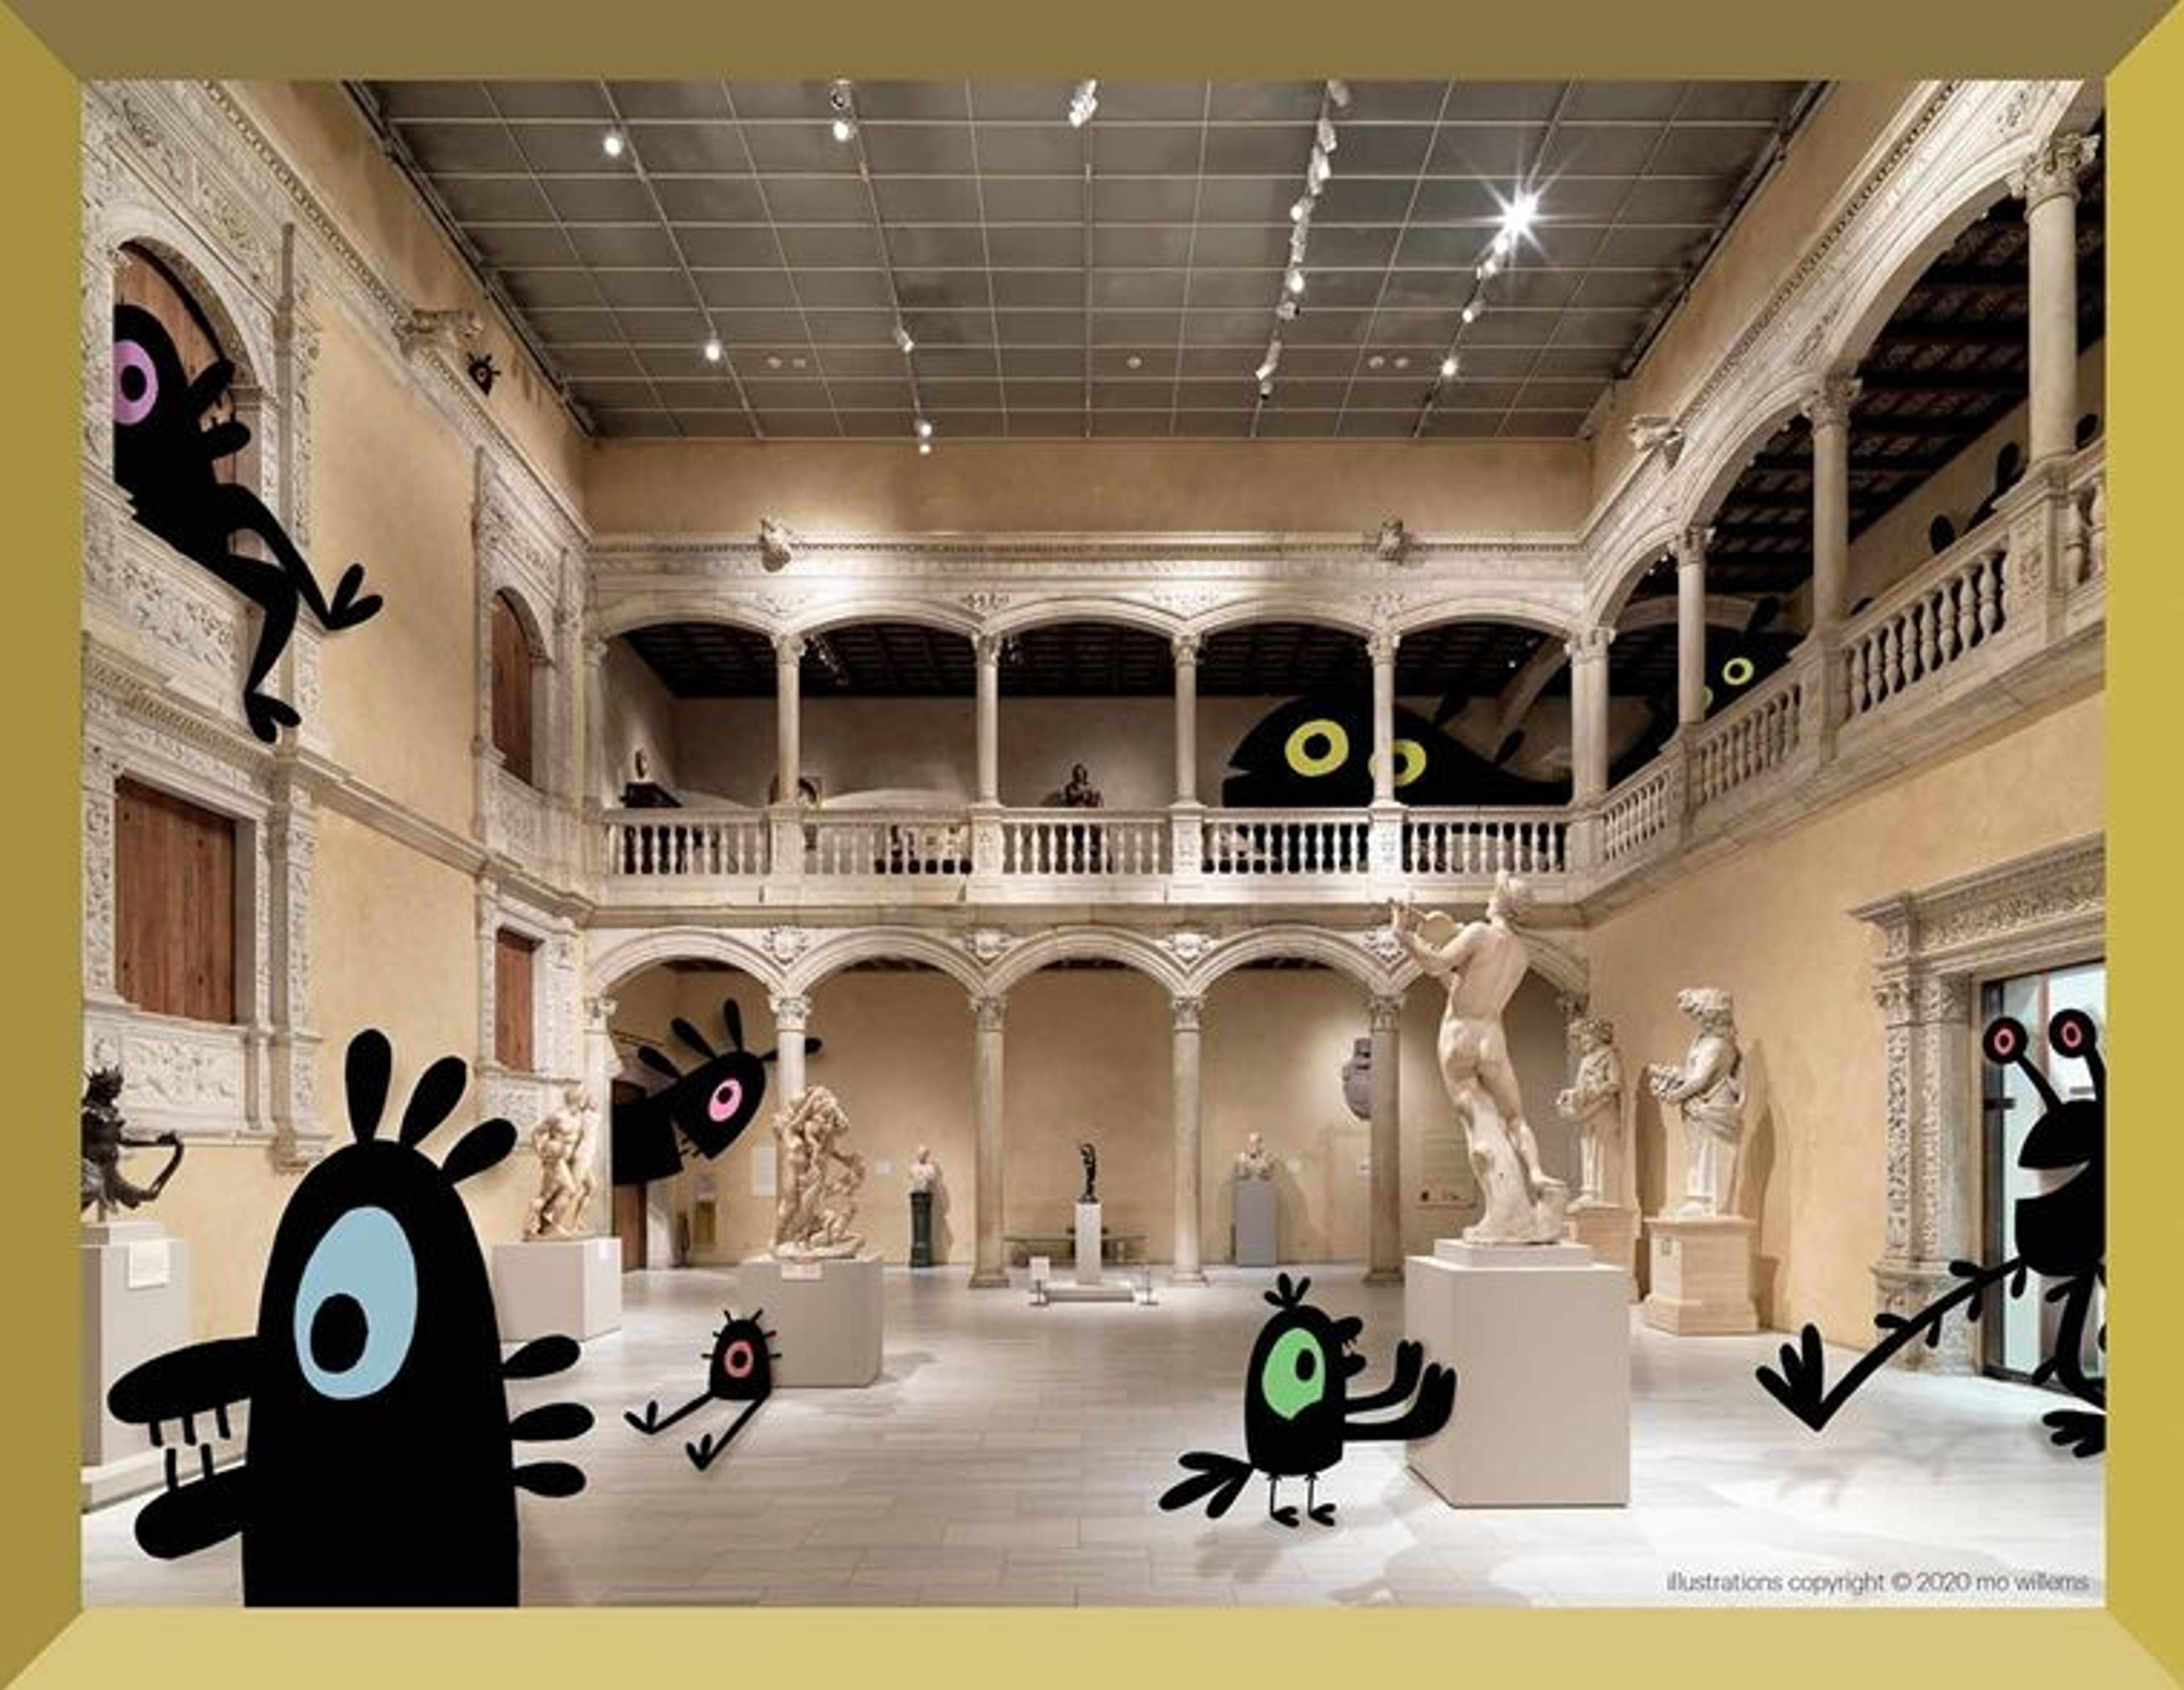 A photograph of the two-story patio of the Velez Blanco castle, which was originally in Spain but was relocated to The Met. The room, which is scattered with sculptures of people and natural creatures on plinths, is illustrated with simple quirky black cartoon characters scattered throughout the image looking at the art.